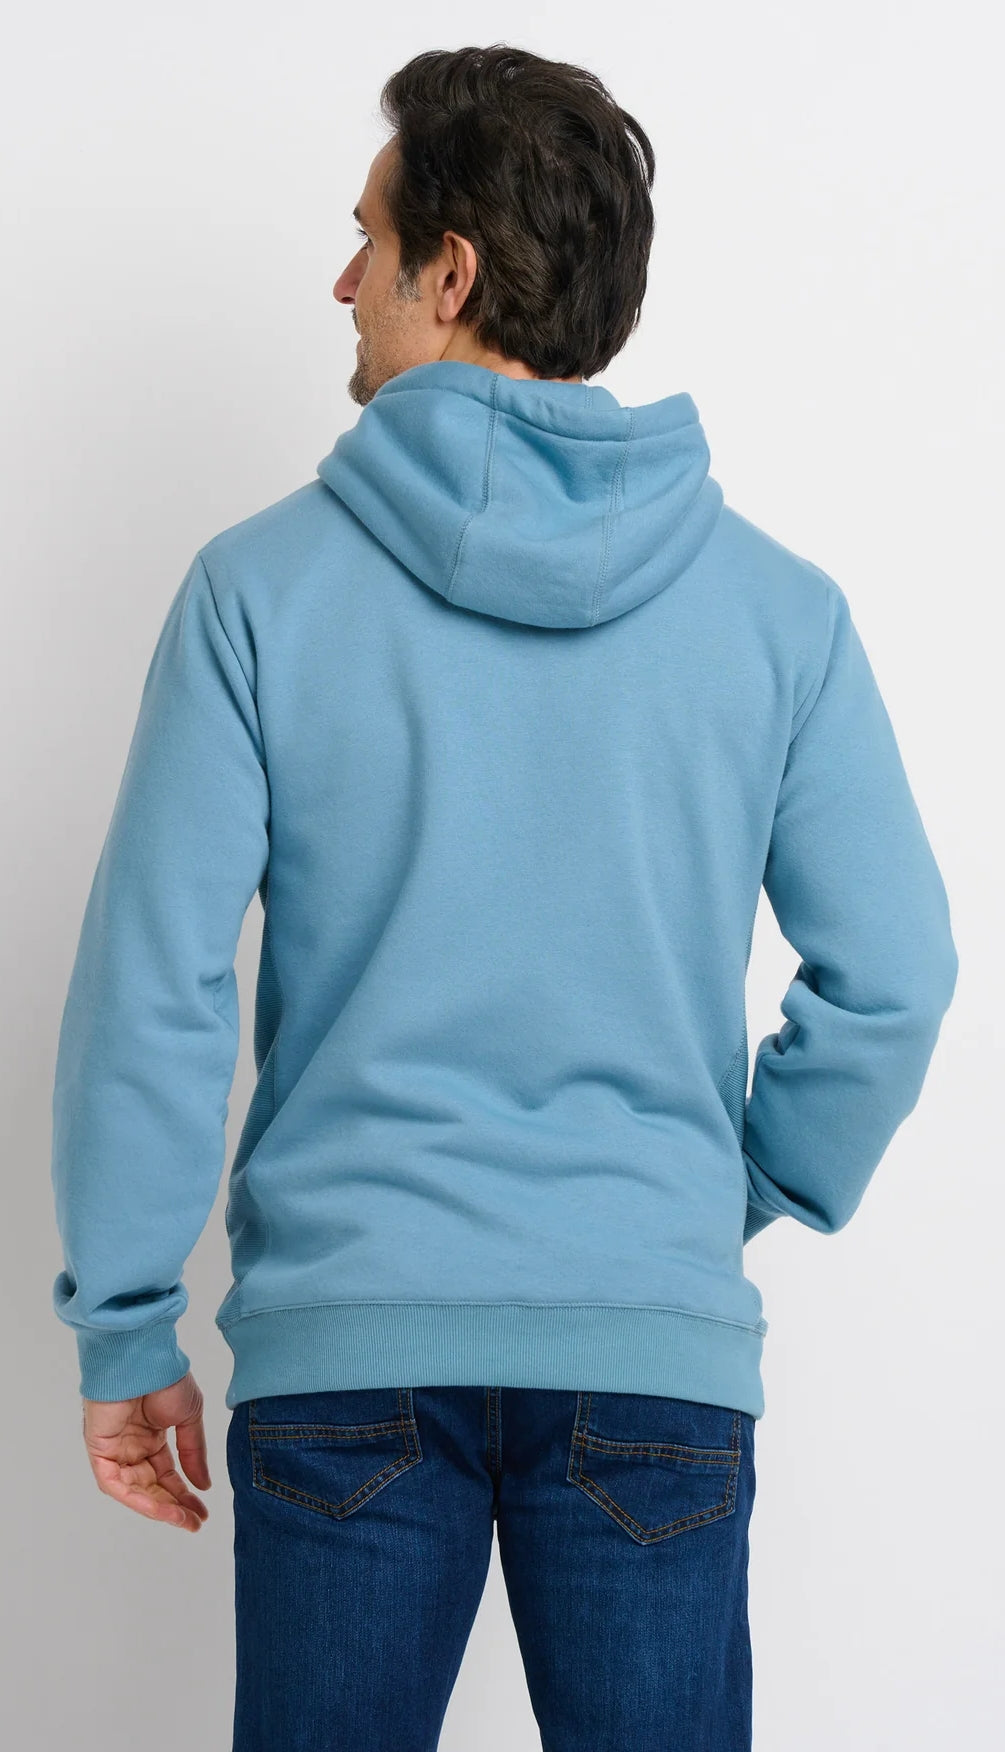 A blue men's hoody from Brakeburn with an abstract bicycle print on the front